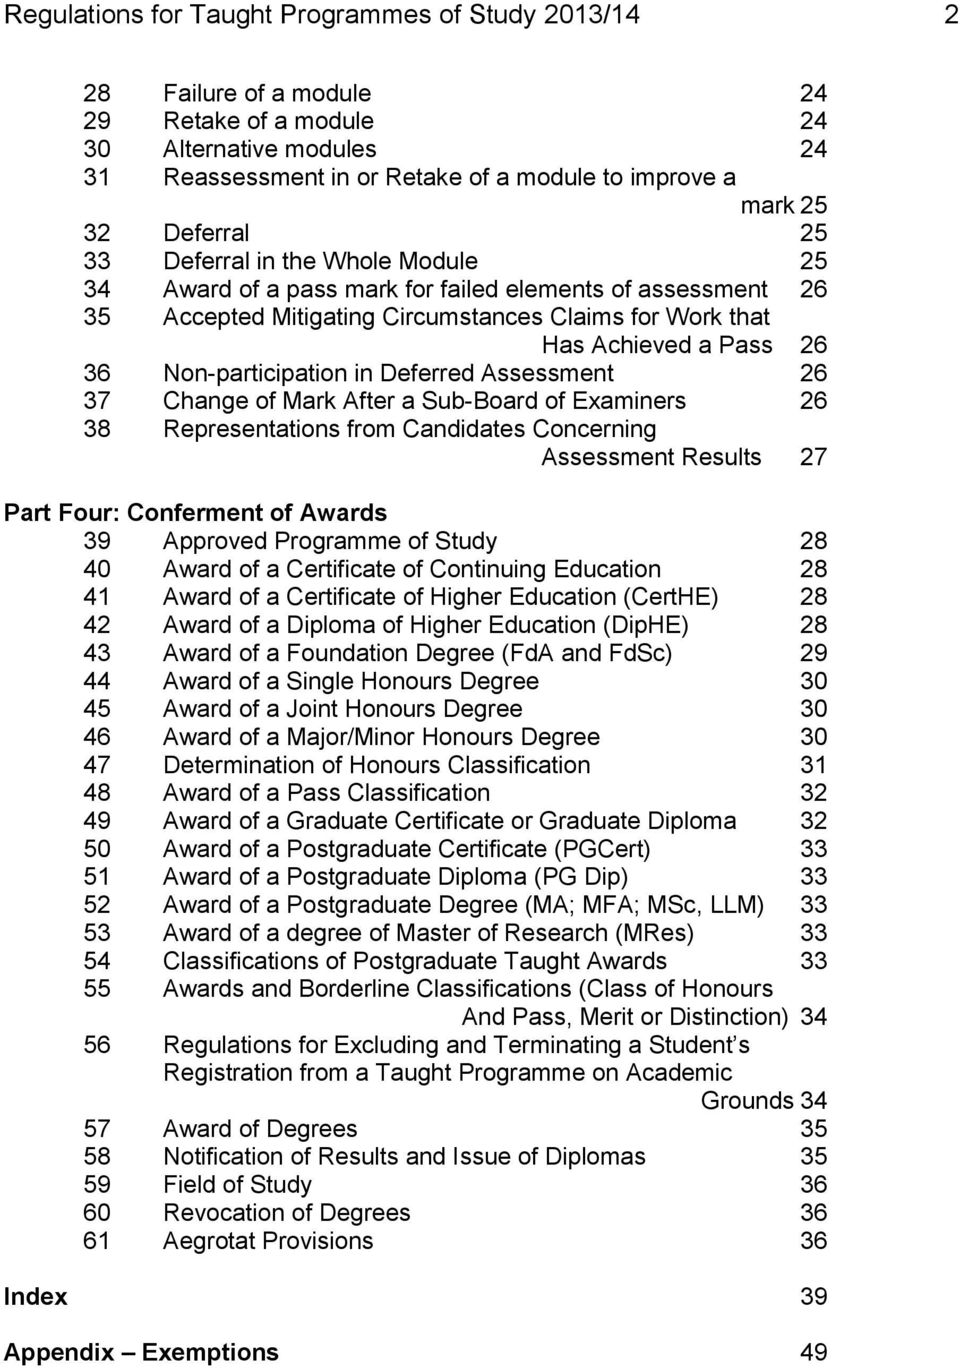 Non-participation in Deferred Assessment 26 37 Change of Mark After a Sub-Board of Examiners 26 38 Representations from Candidates Concerning Assessment Results 27 Part Four: Conferment of Awards 39